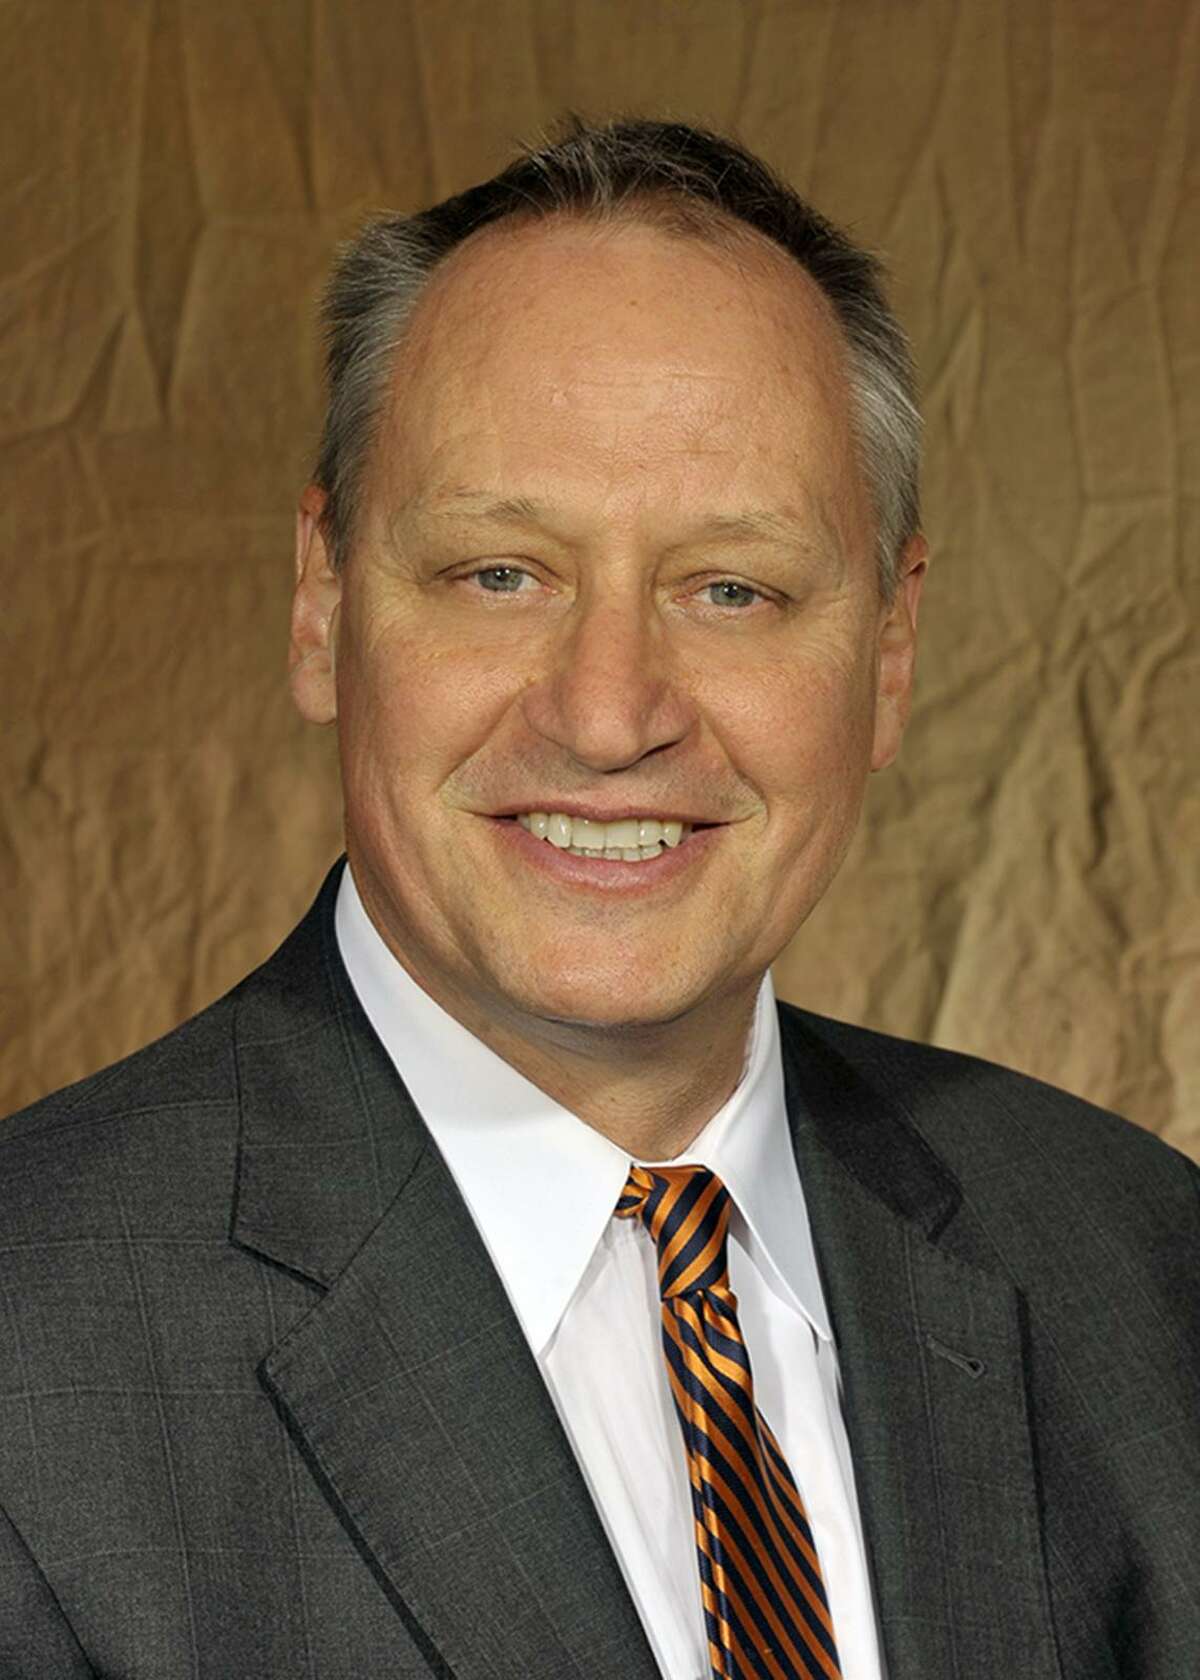 Eighmy, vice-chancellor for research and engagement at University of Tennesse-Knoxville, as the sole finalist for the next president of University of Texas at San Antonio.